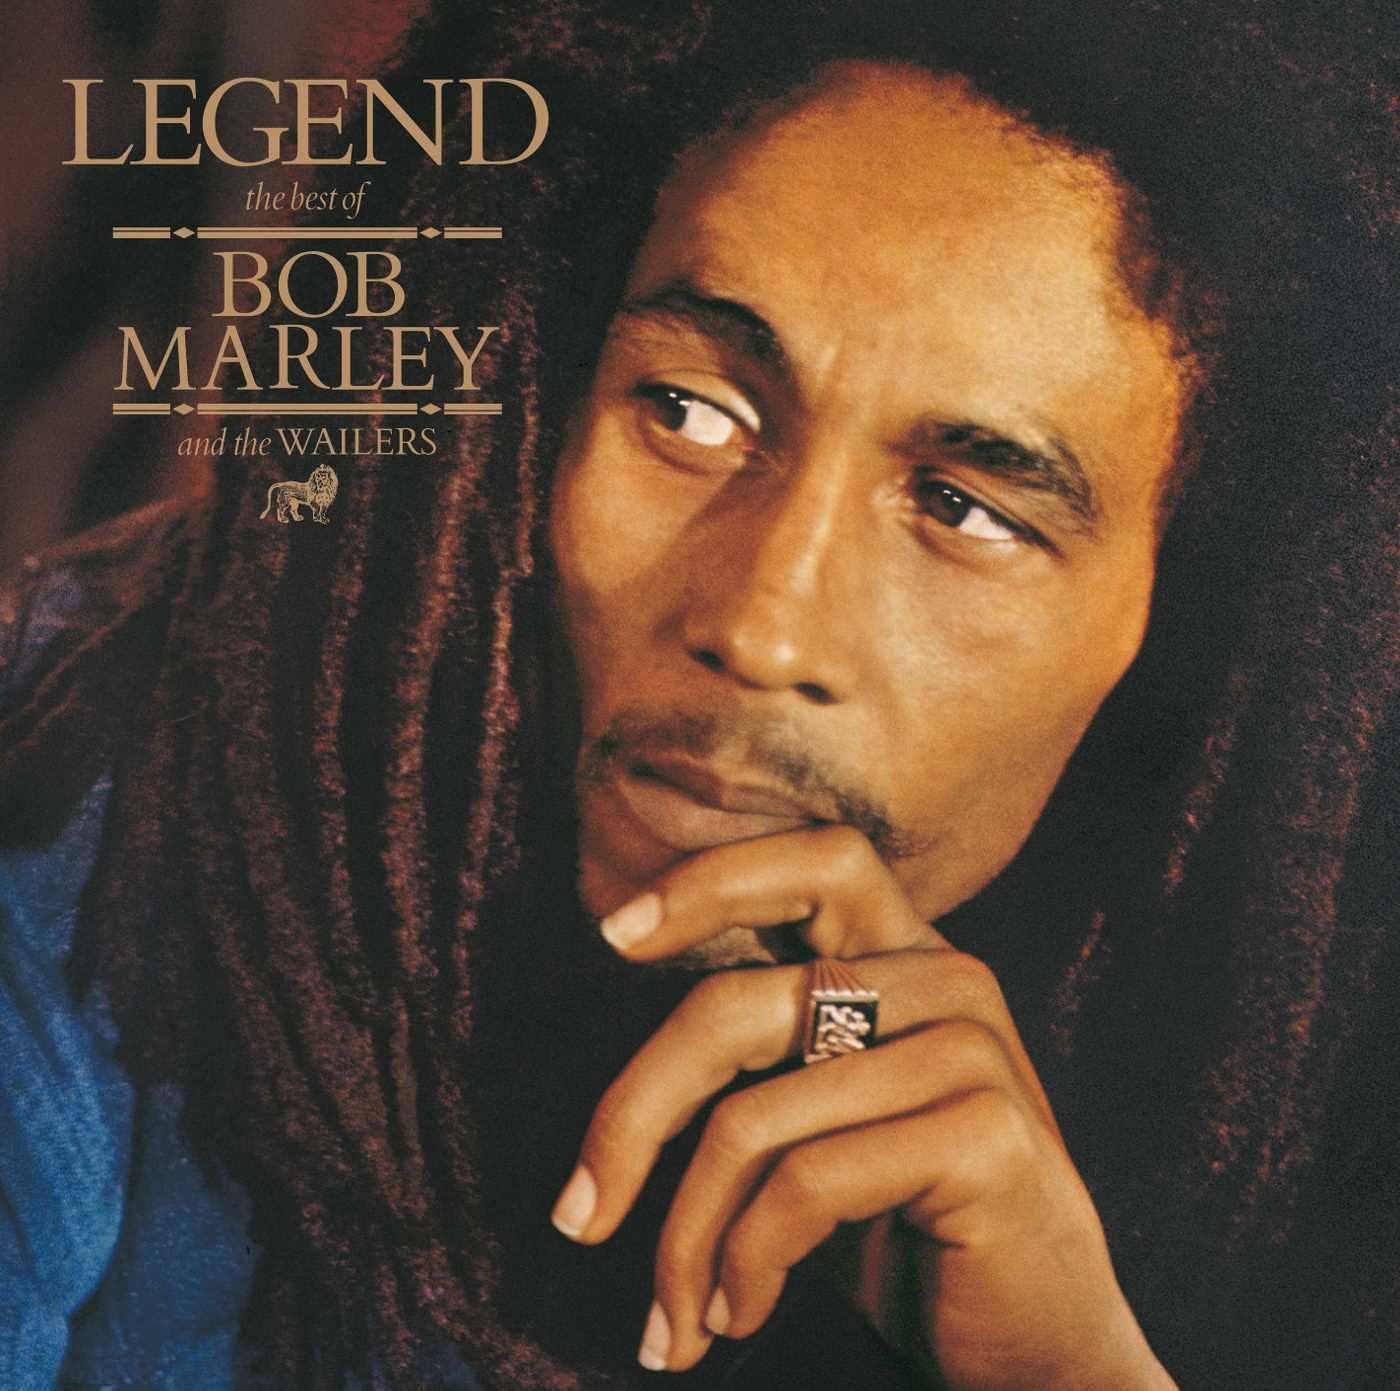 Happy Birthday to Robert Nesta Marley
6 February 1945 - Legends never die What\s your favourite Bob Marley song? 